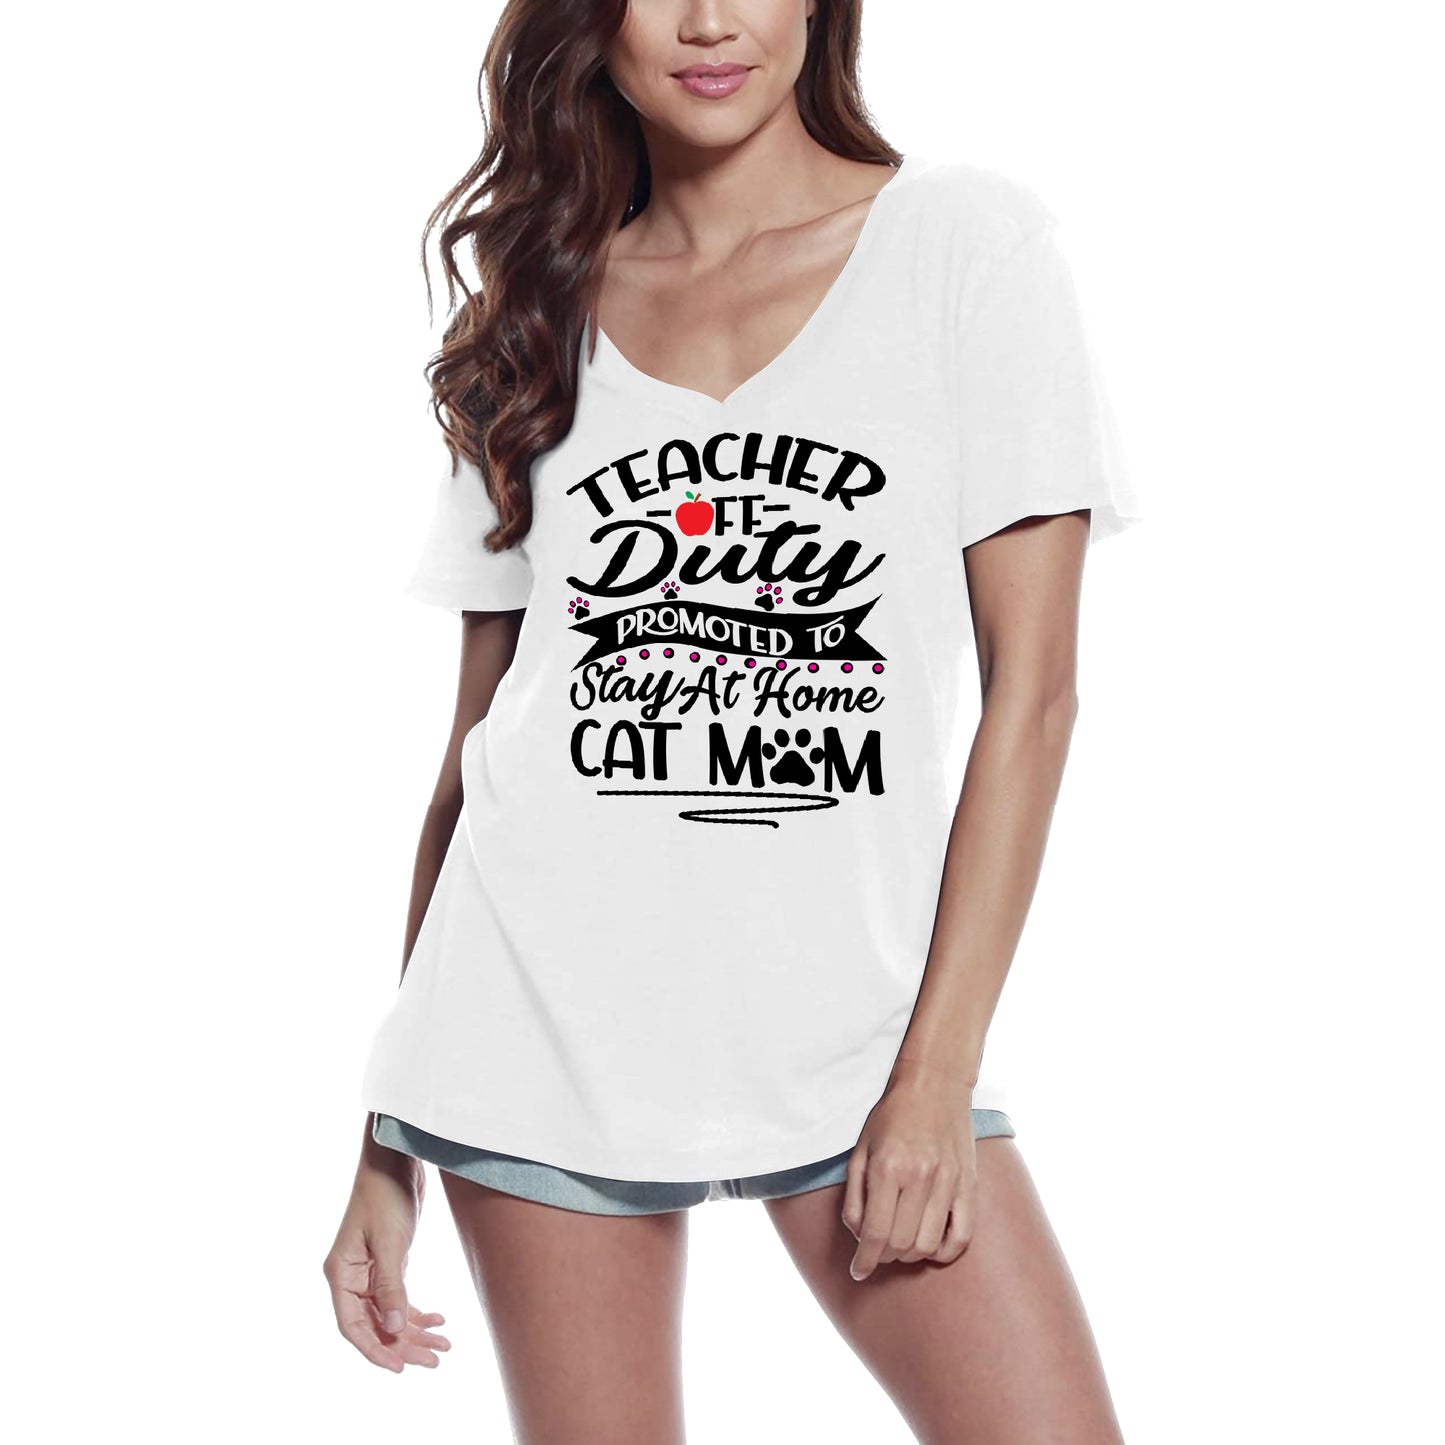 ULTRABASIC Women's T-Shirt Cat Mom - Teacher Off Duty Promoted to Stay At Home - Funny Kitten Shirt for Cat Lovers